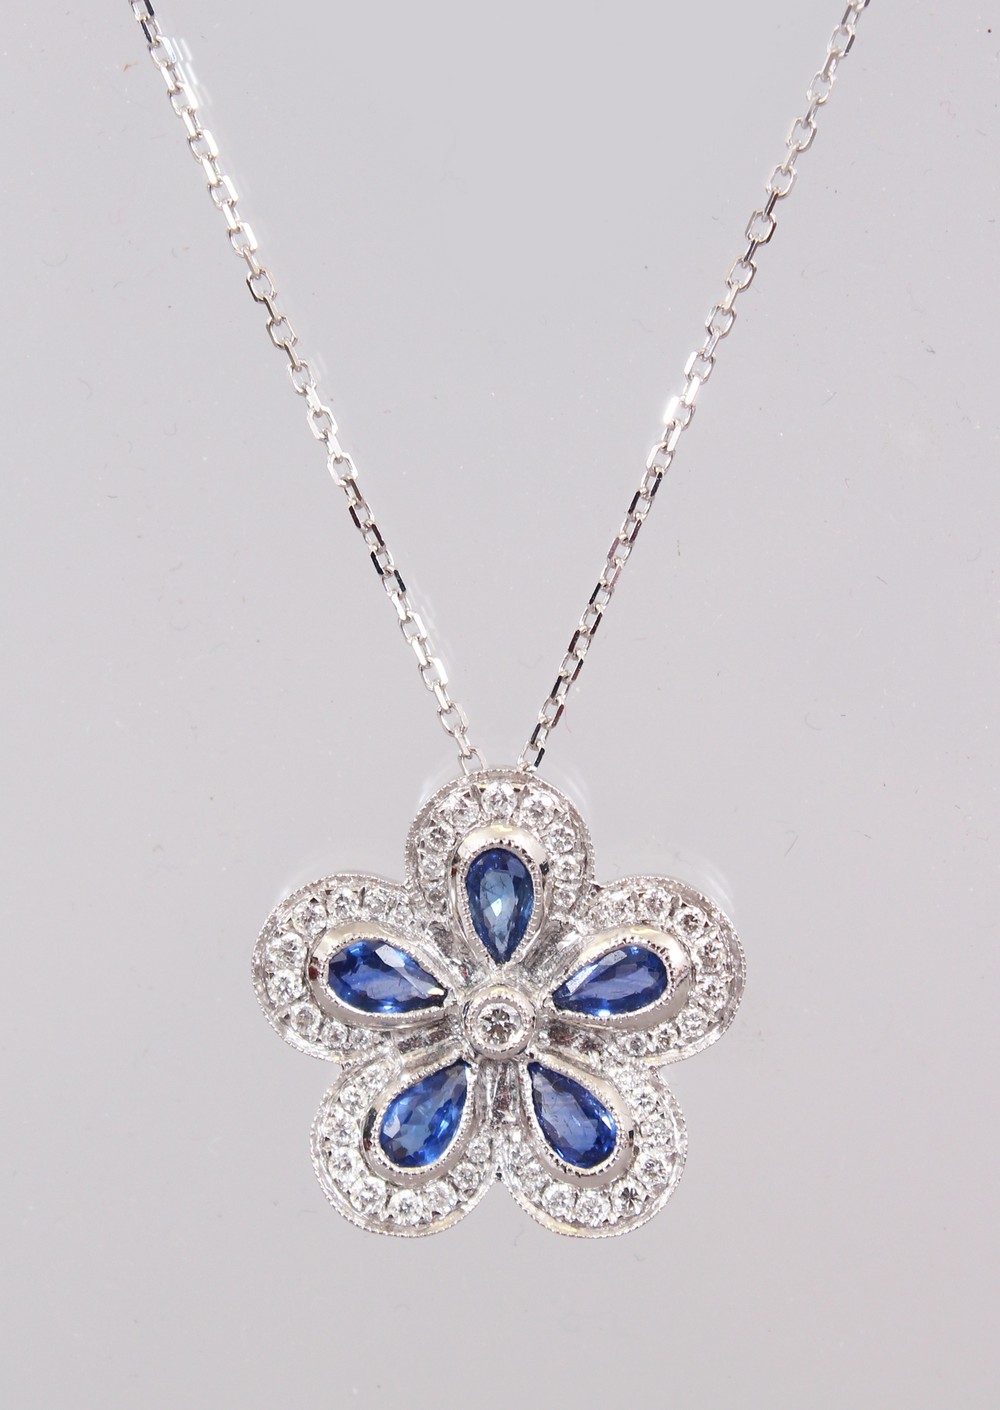 AN 18CT WHITE GOLD FLOWER SHAPED SAPPHIRE AND DIAMOND PENDANT NECKLACE OF 1.5cts. - Image 3 of 3